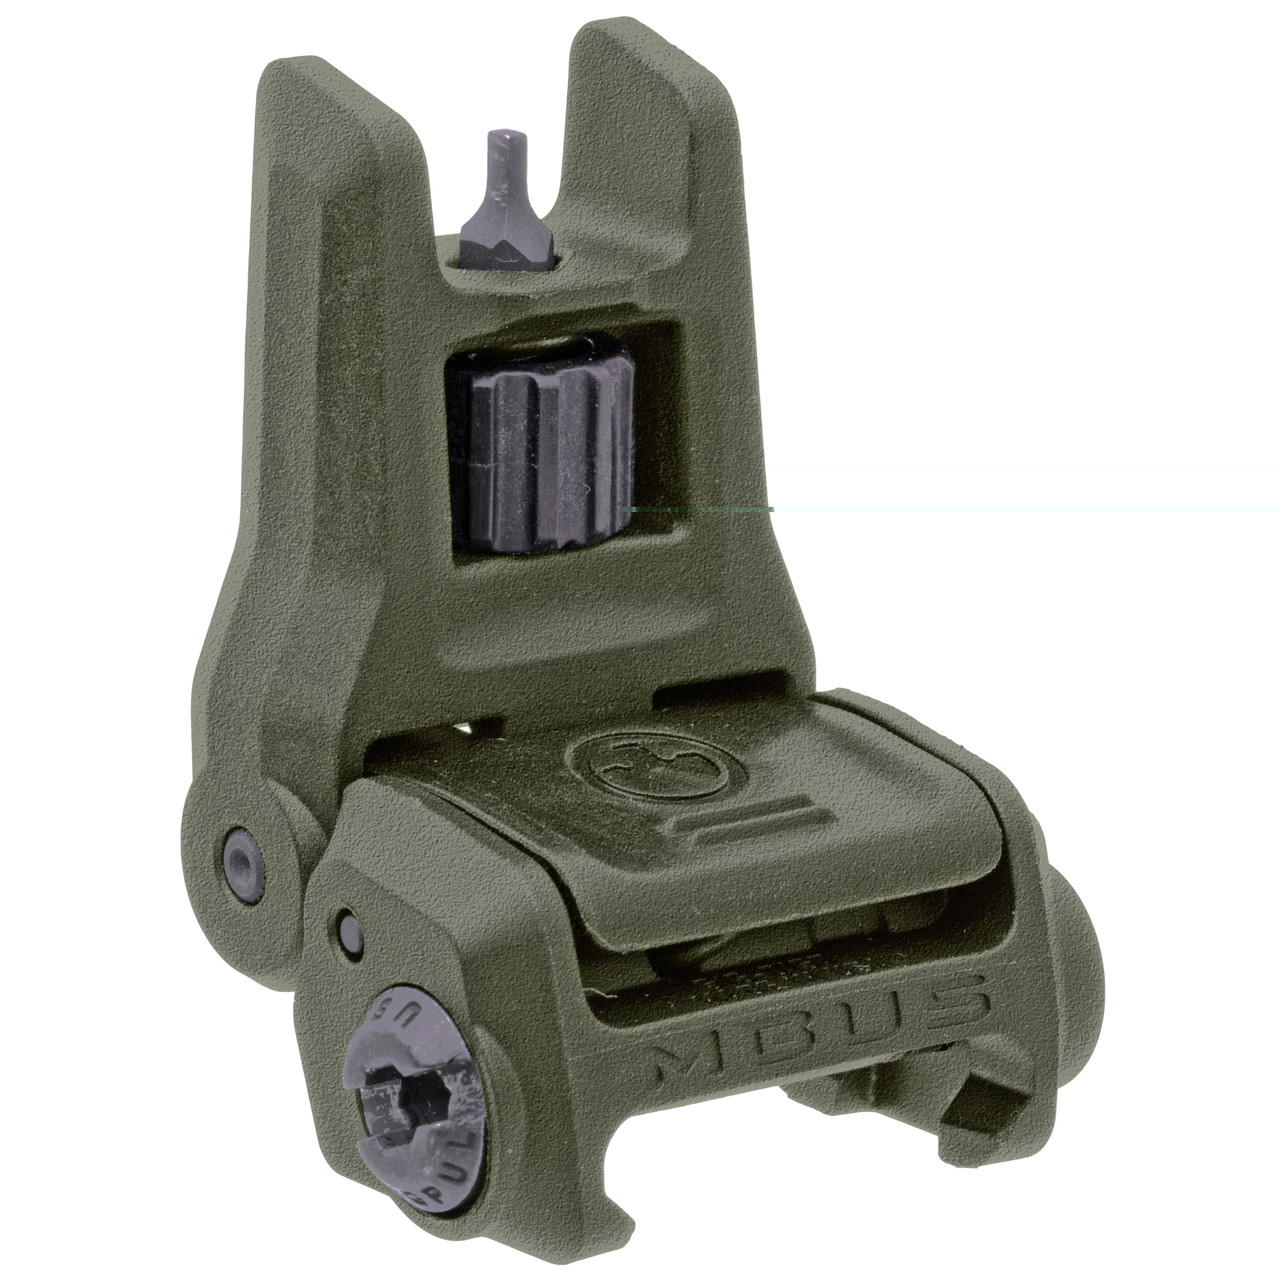 Magpul Industries MAG1166-ODG Mbus 3 Front Sight Odg